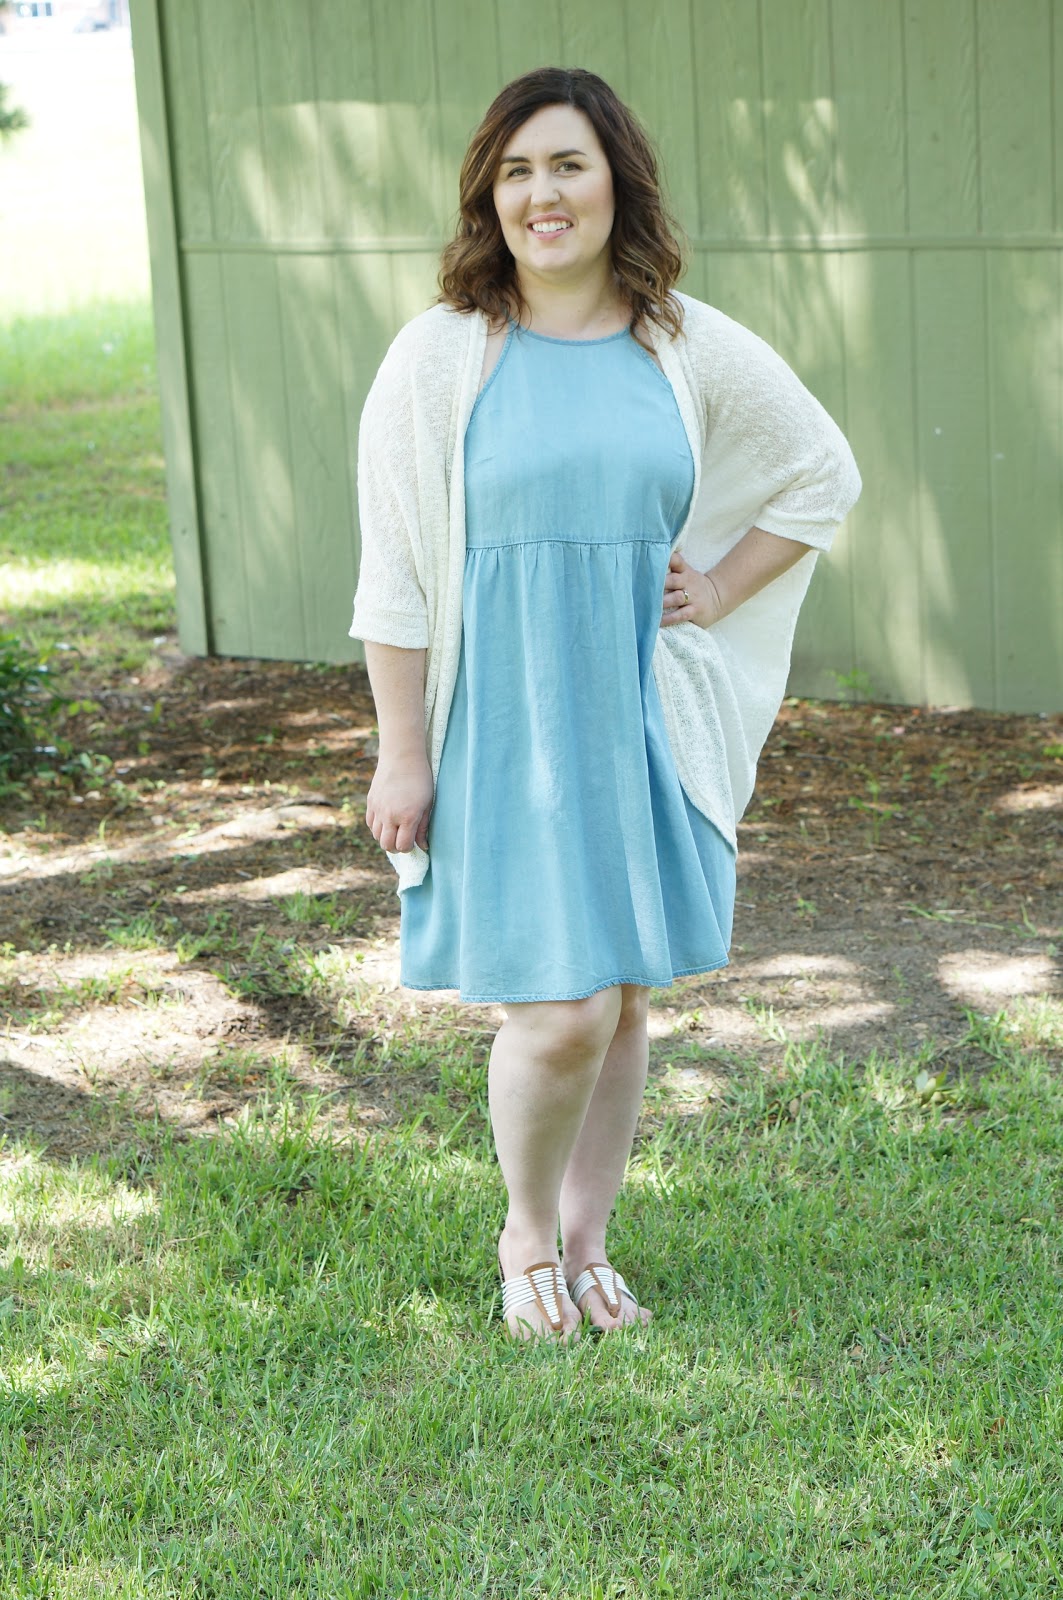 Rebecca Lately Target Chambray Swing Dress Cream Cocoon Cardigan Target DV Sandals